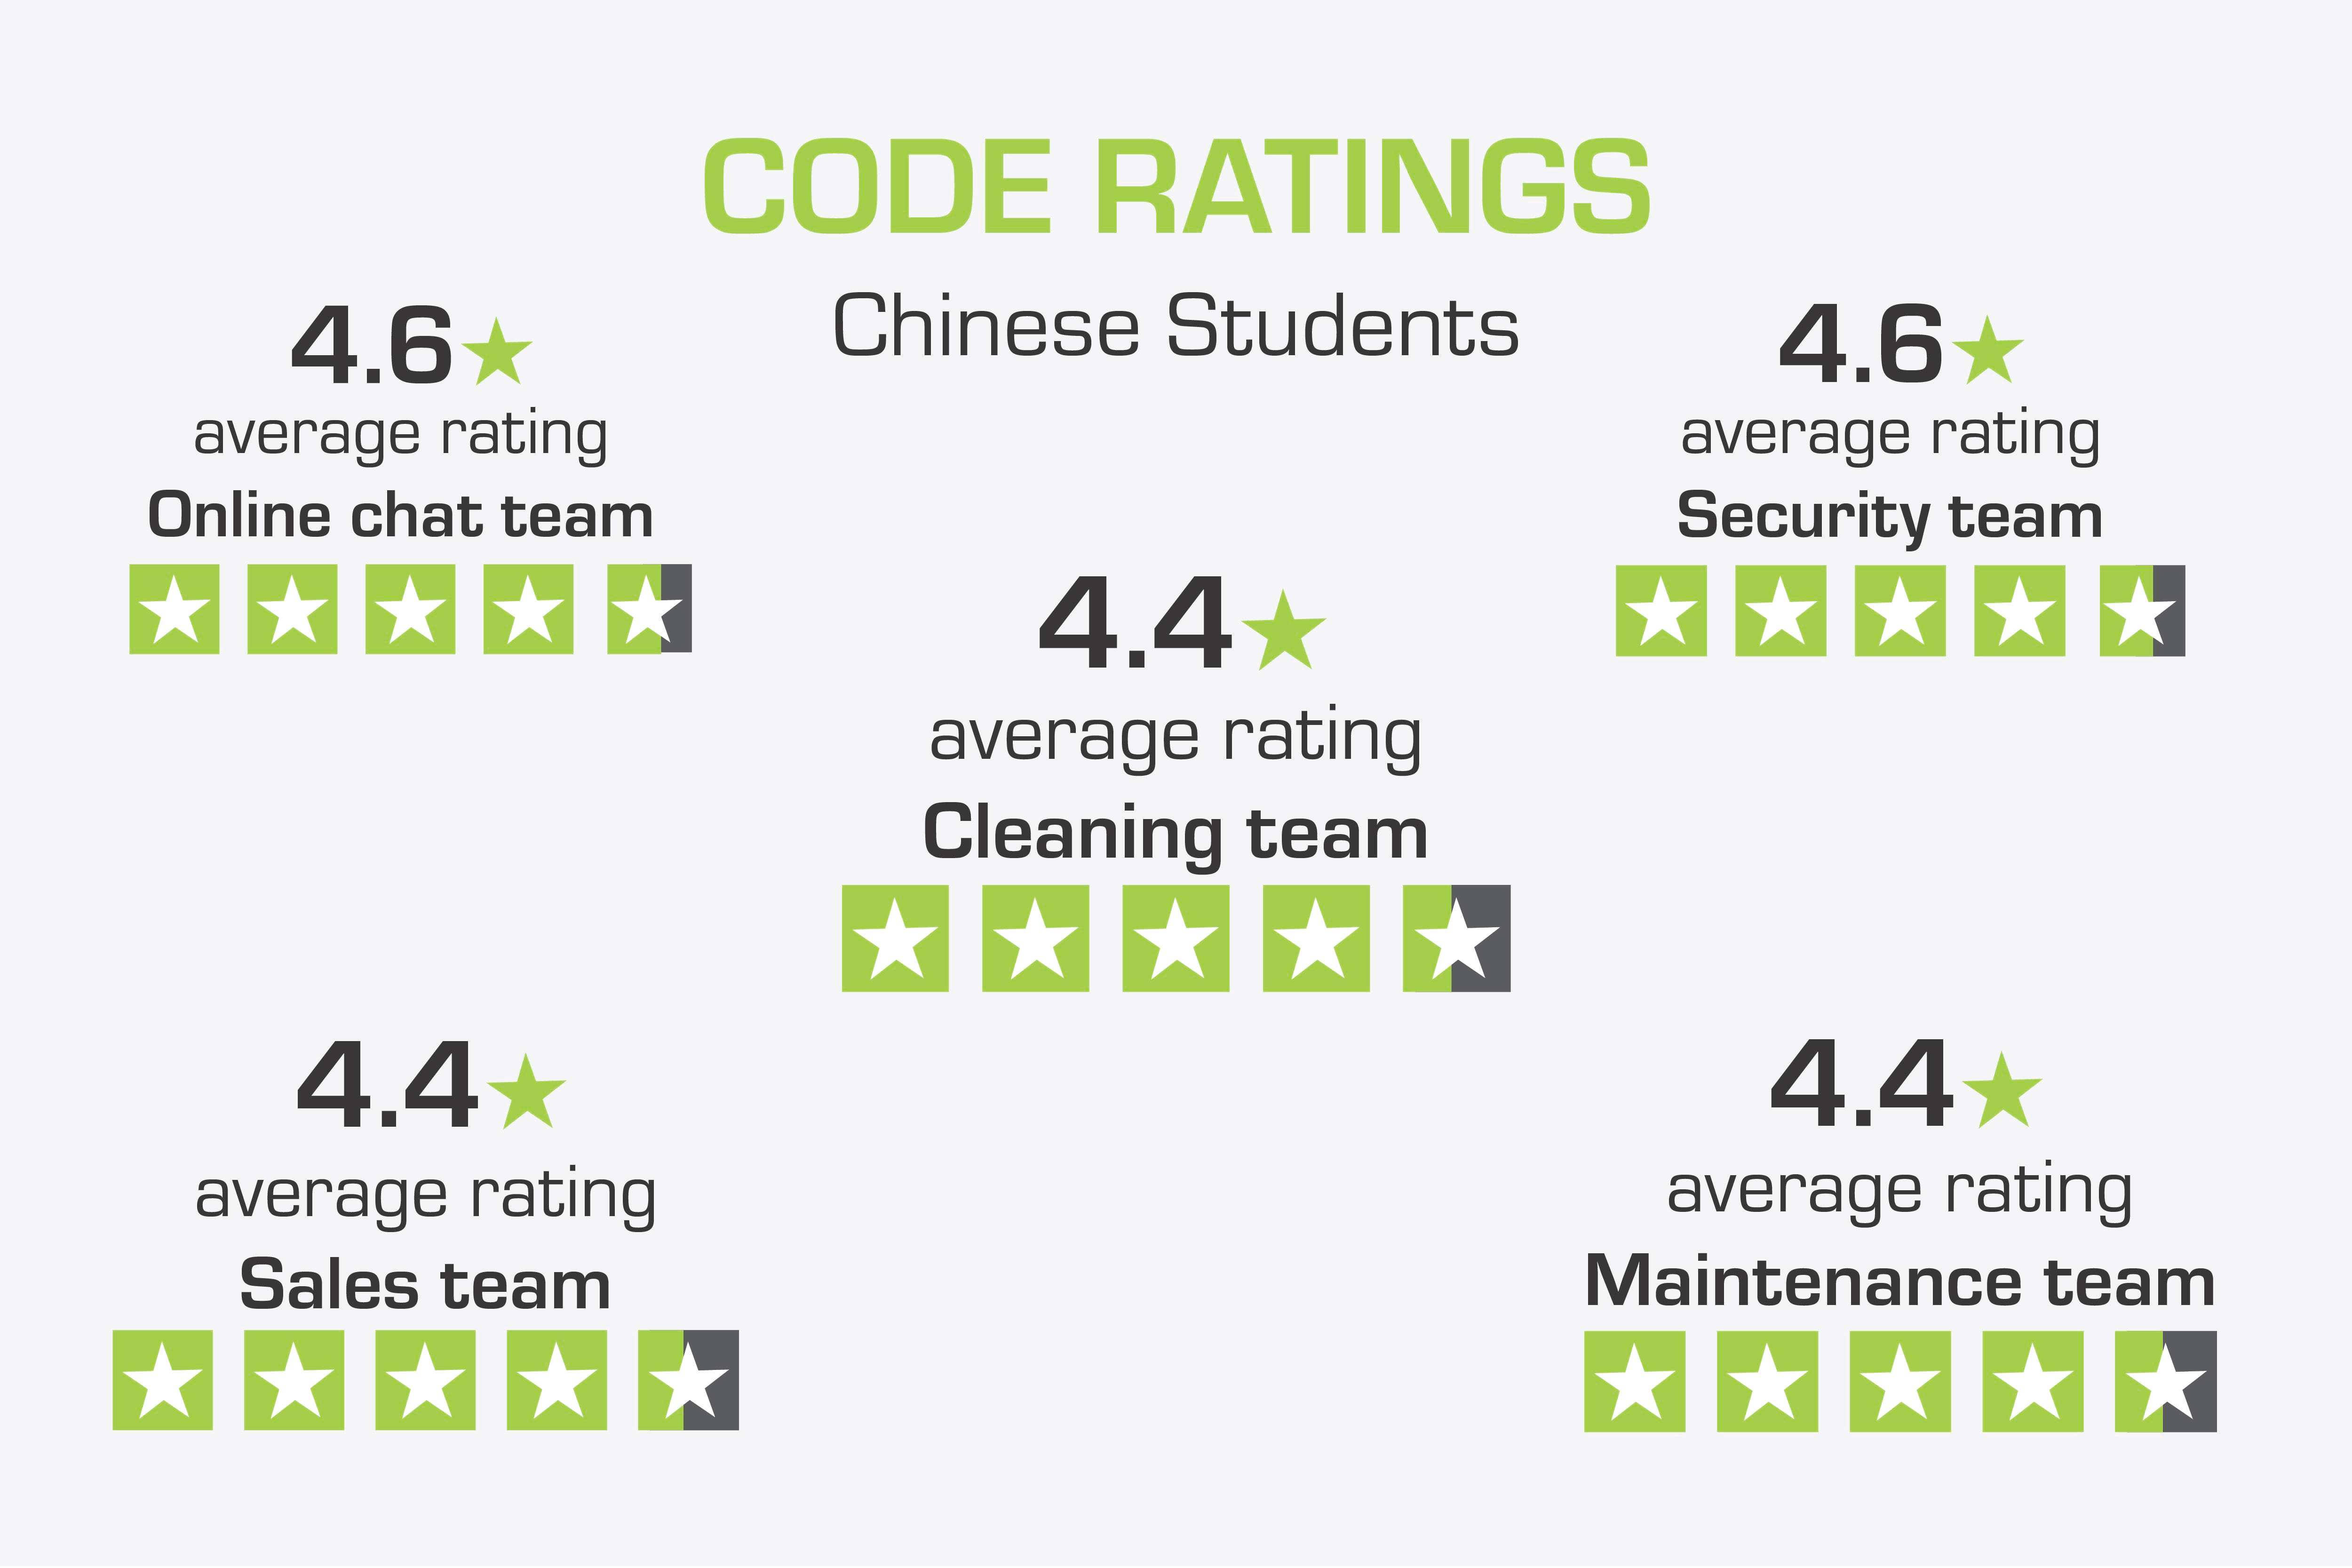 Chinese tenants average ratings of our teams at CODE